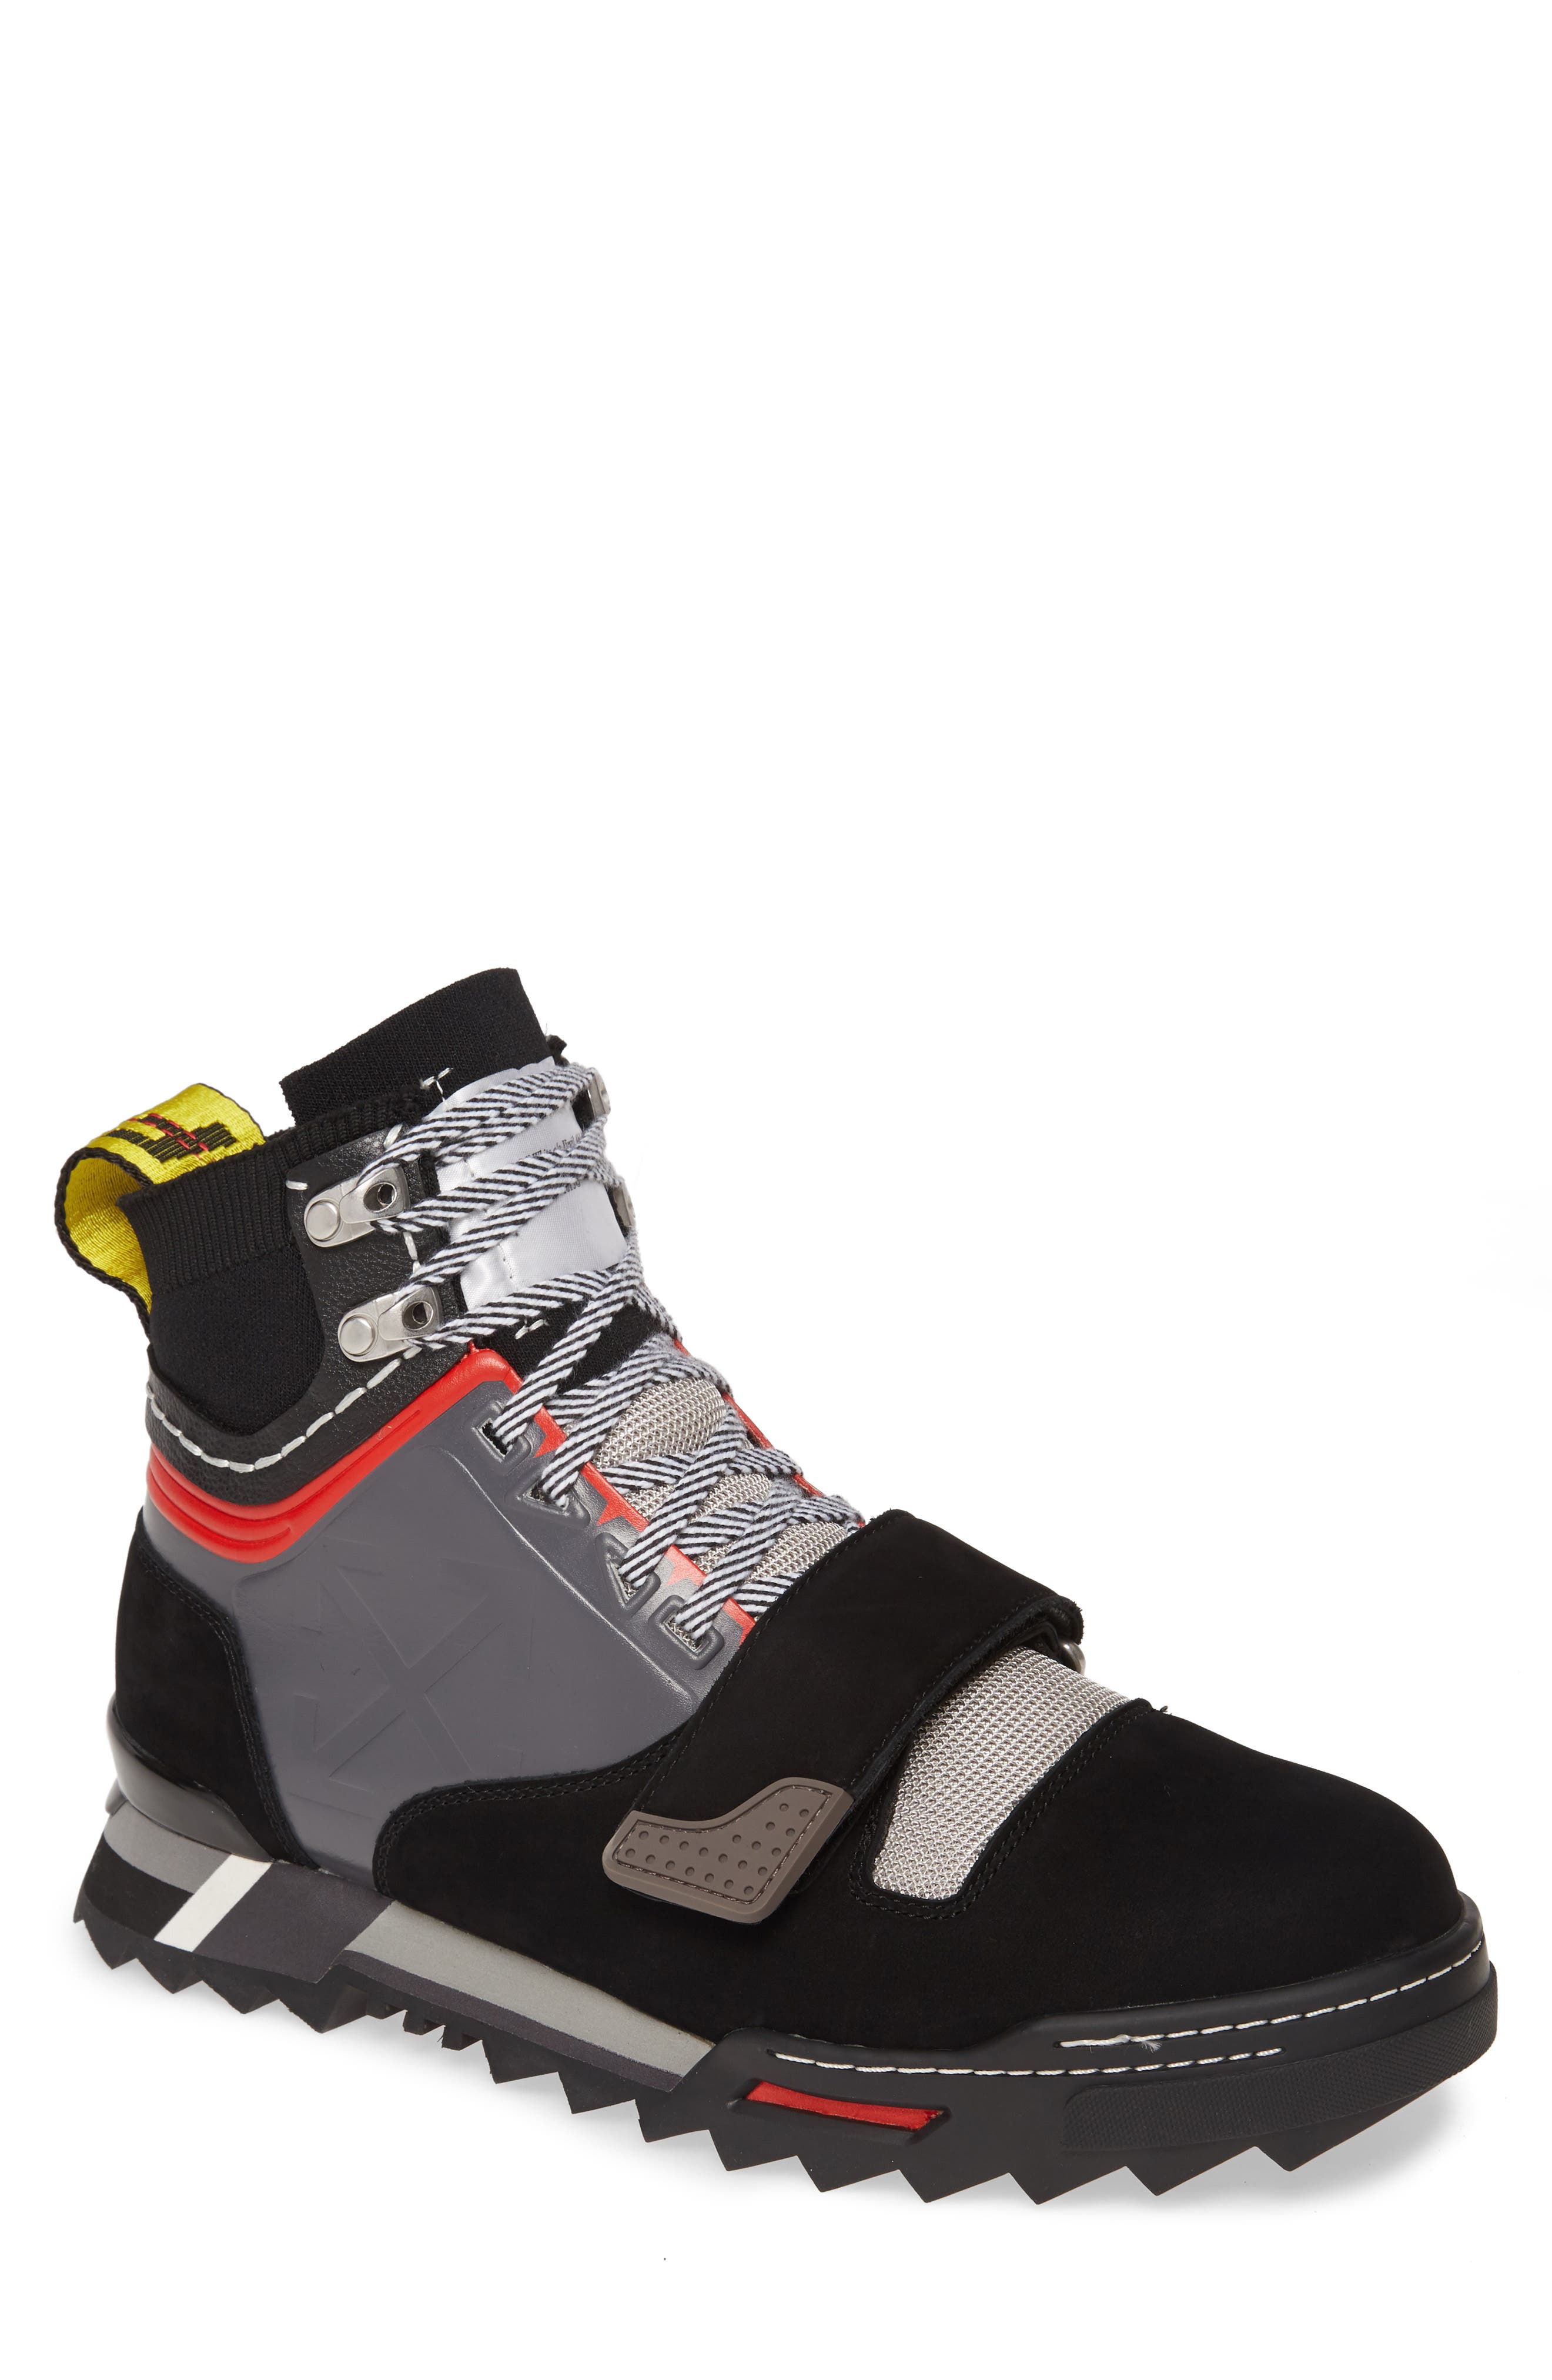 off white boots mens